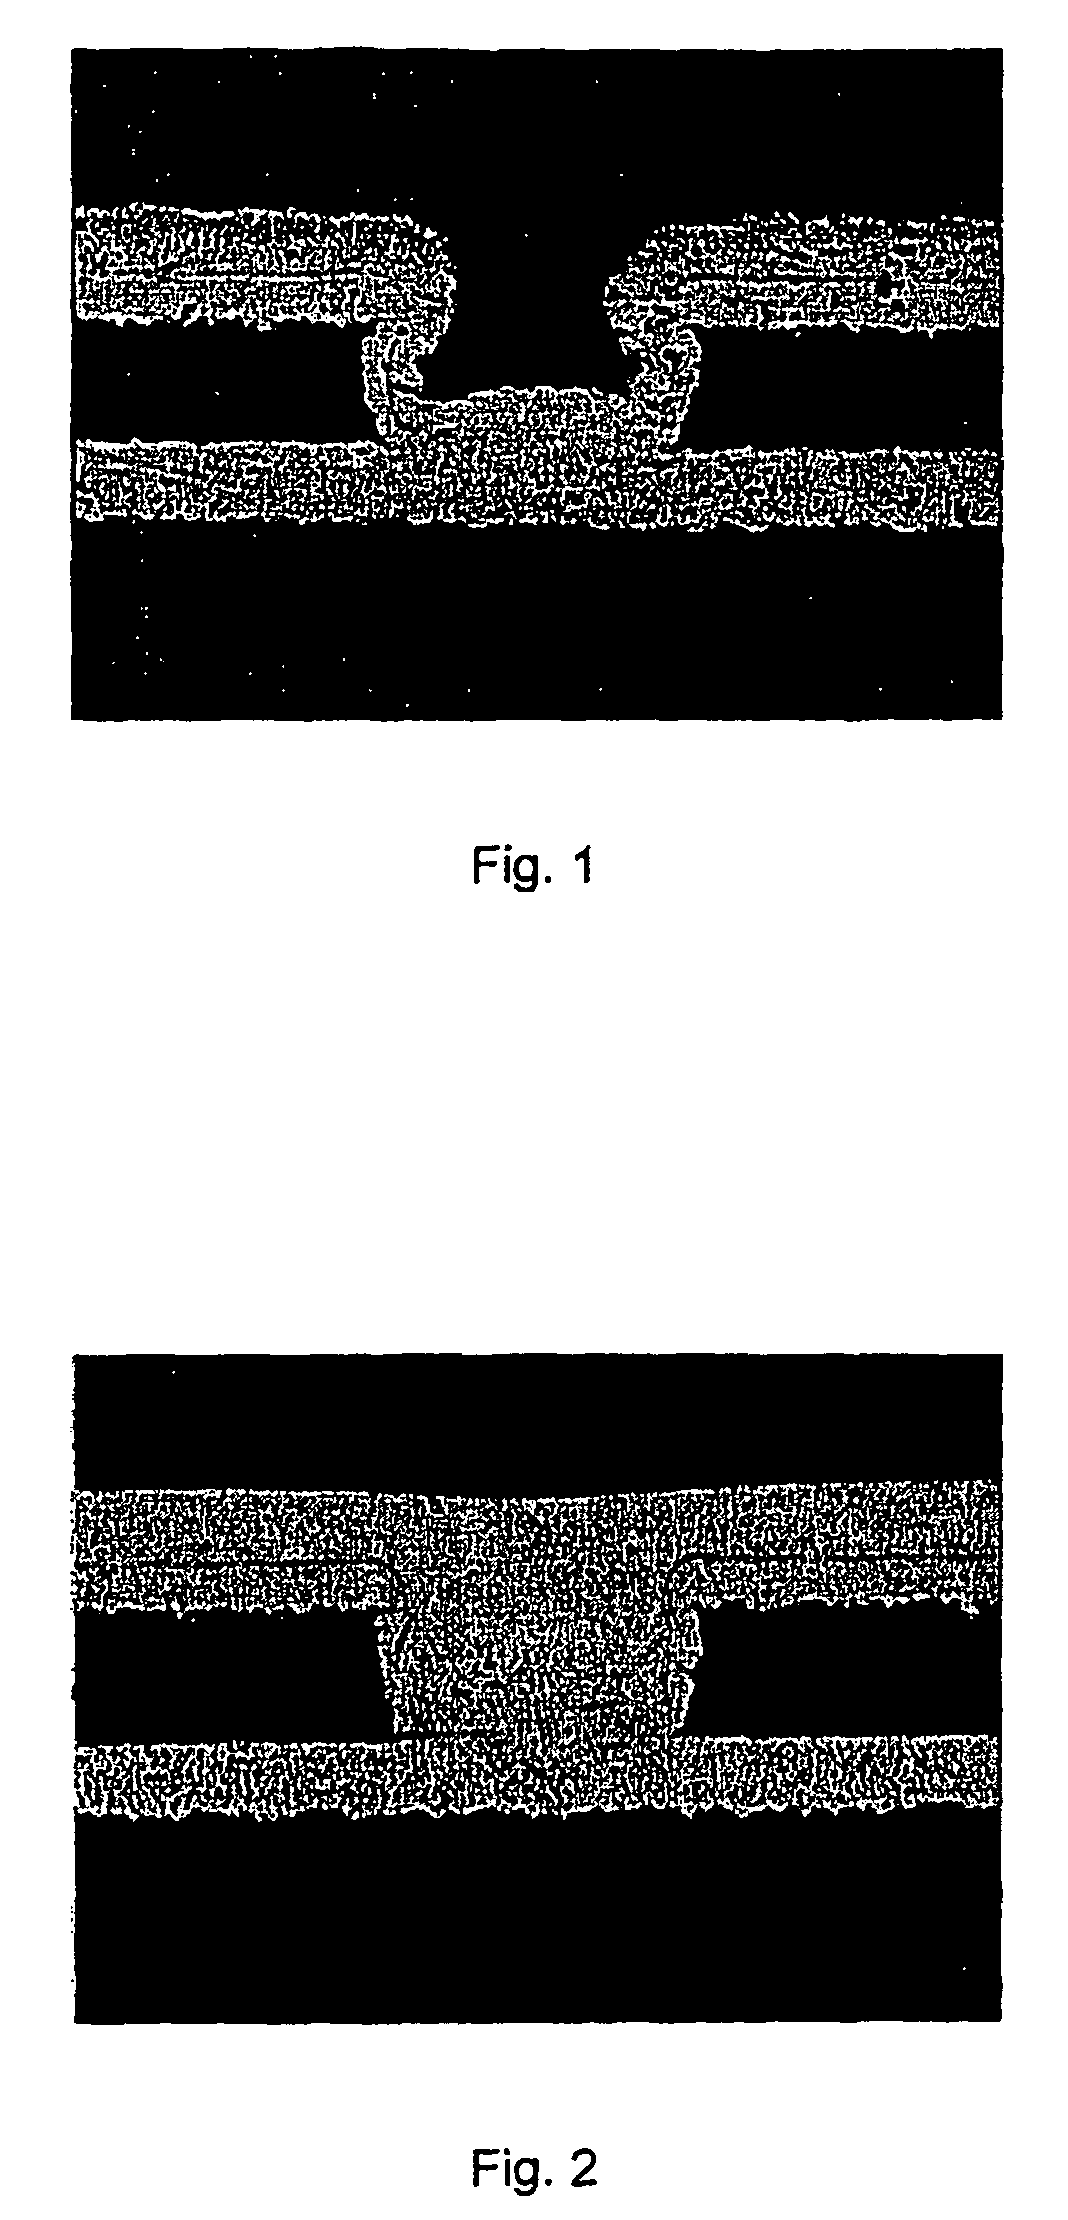 Mixture of oligomeric phenazinium compounds and acid bath for electrolytically depositing a copper deposit